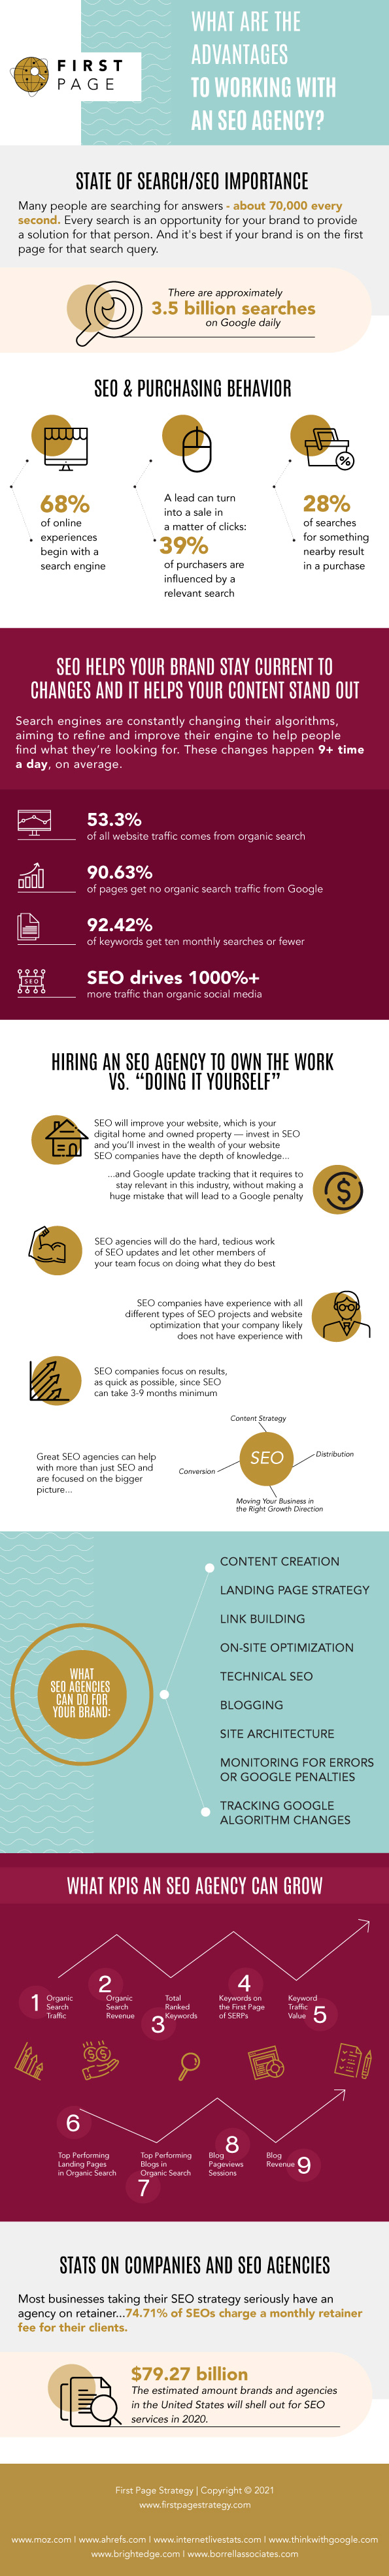 What Are The Advantages of Working With An SEO Agency? ____infographic view |  Business, Marketing|